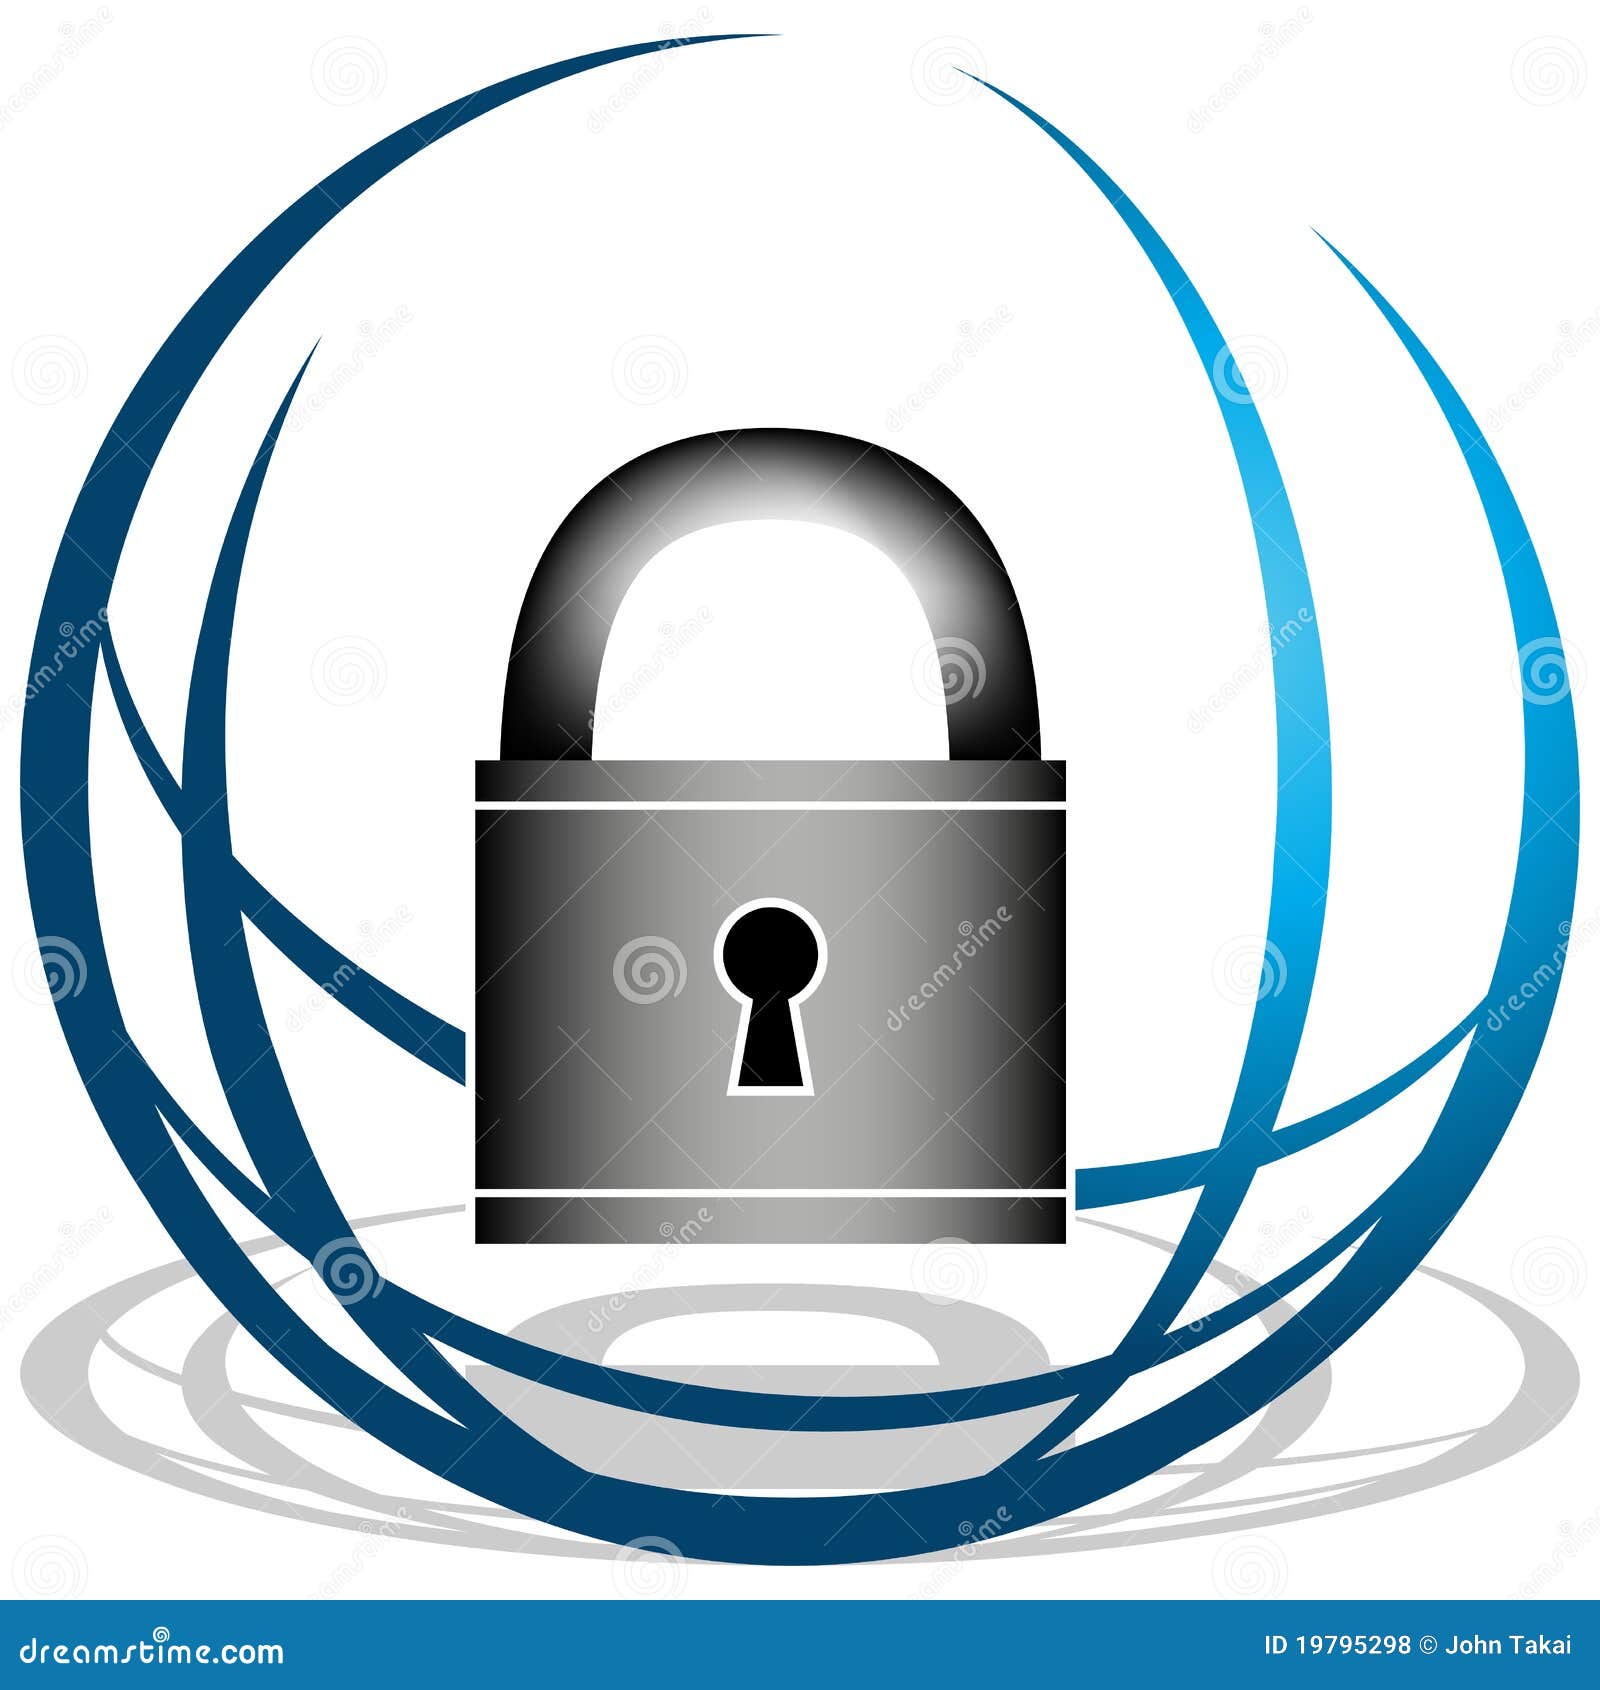 free clipart information security - photo #31